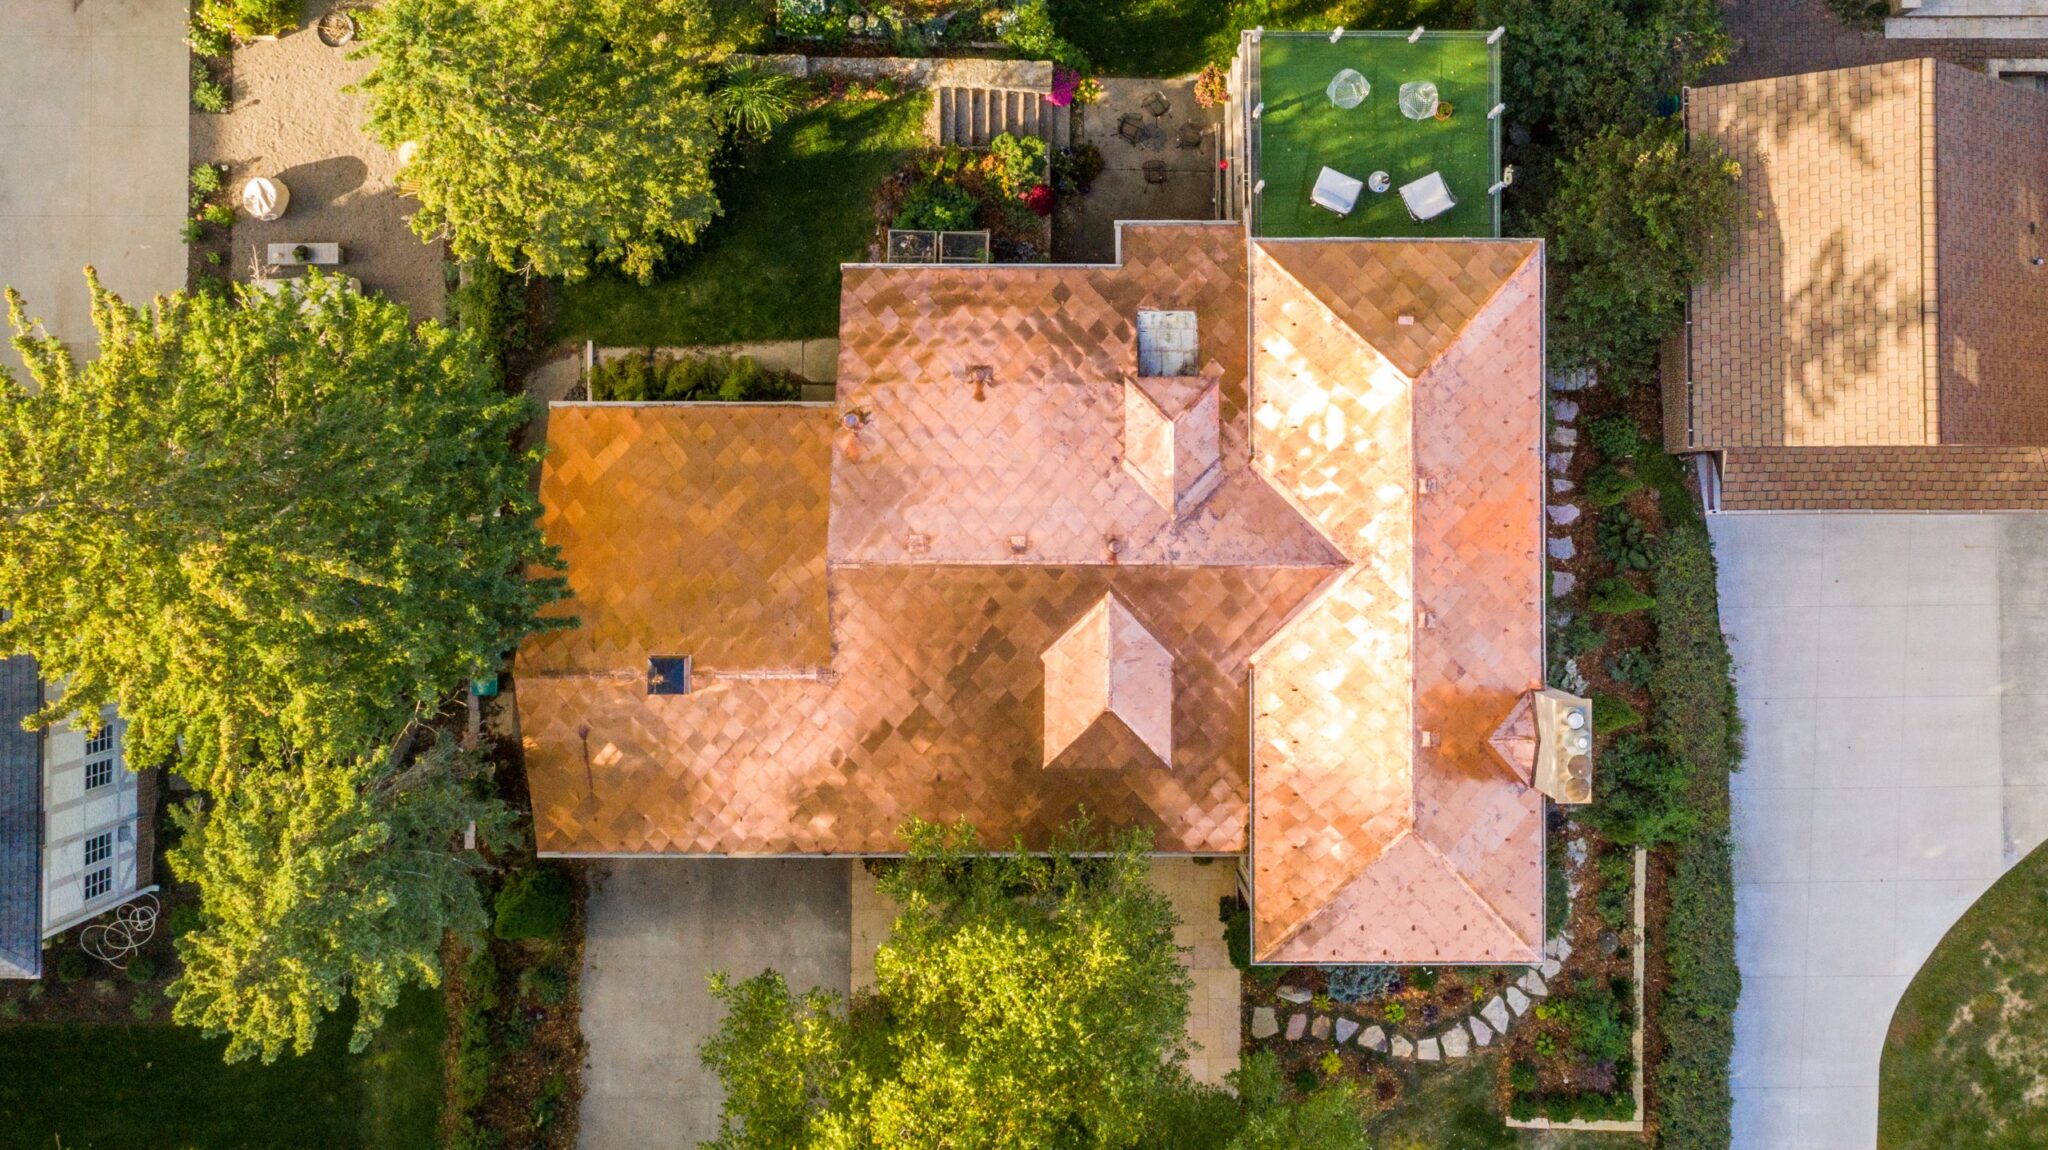 Top down view of shiny copper roof with diamond shingles